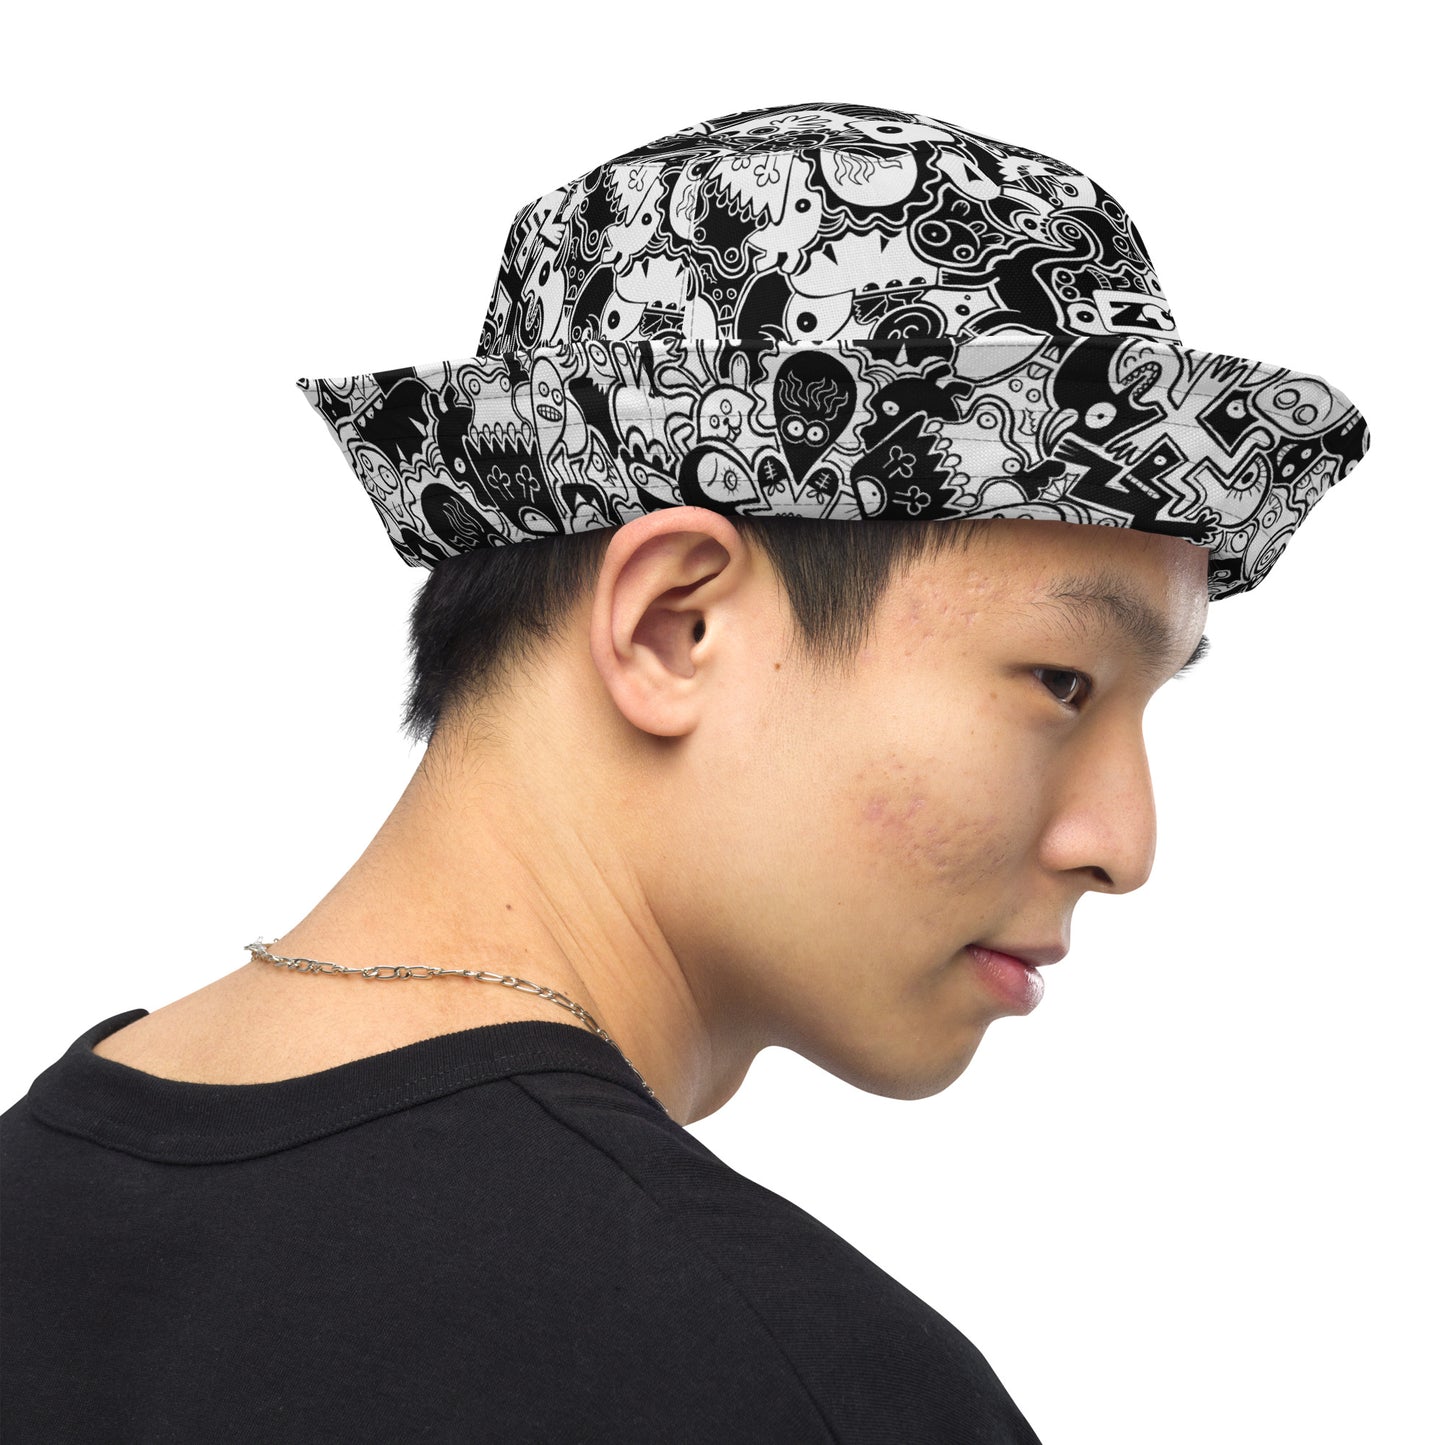 Joyful crowd of black and white doodle creatures Reversible bucket hat. Inside view